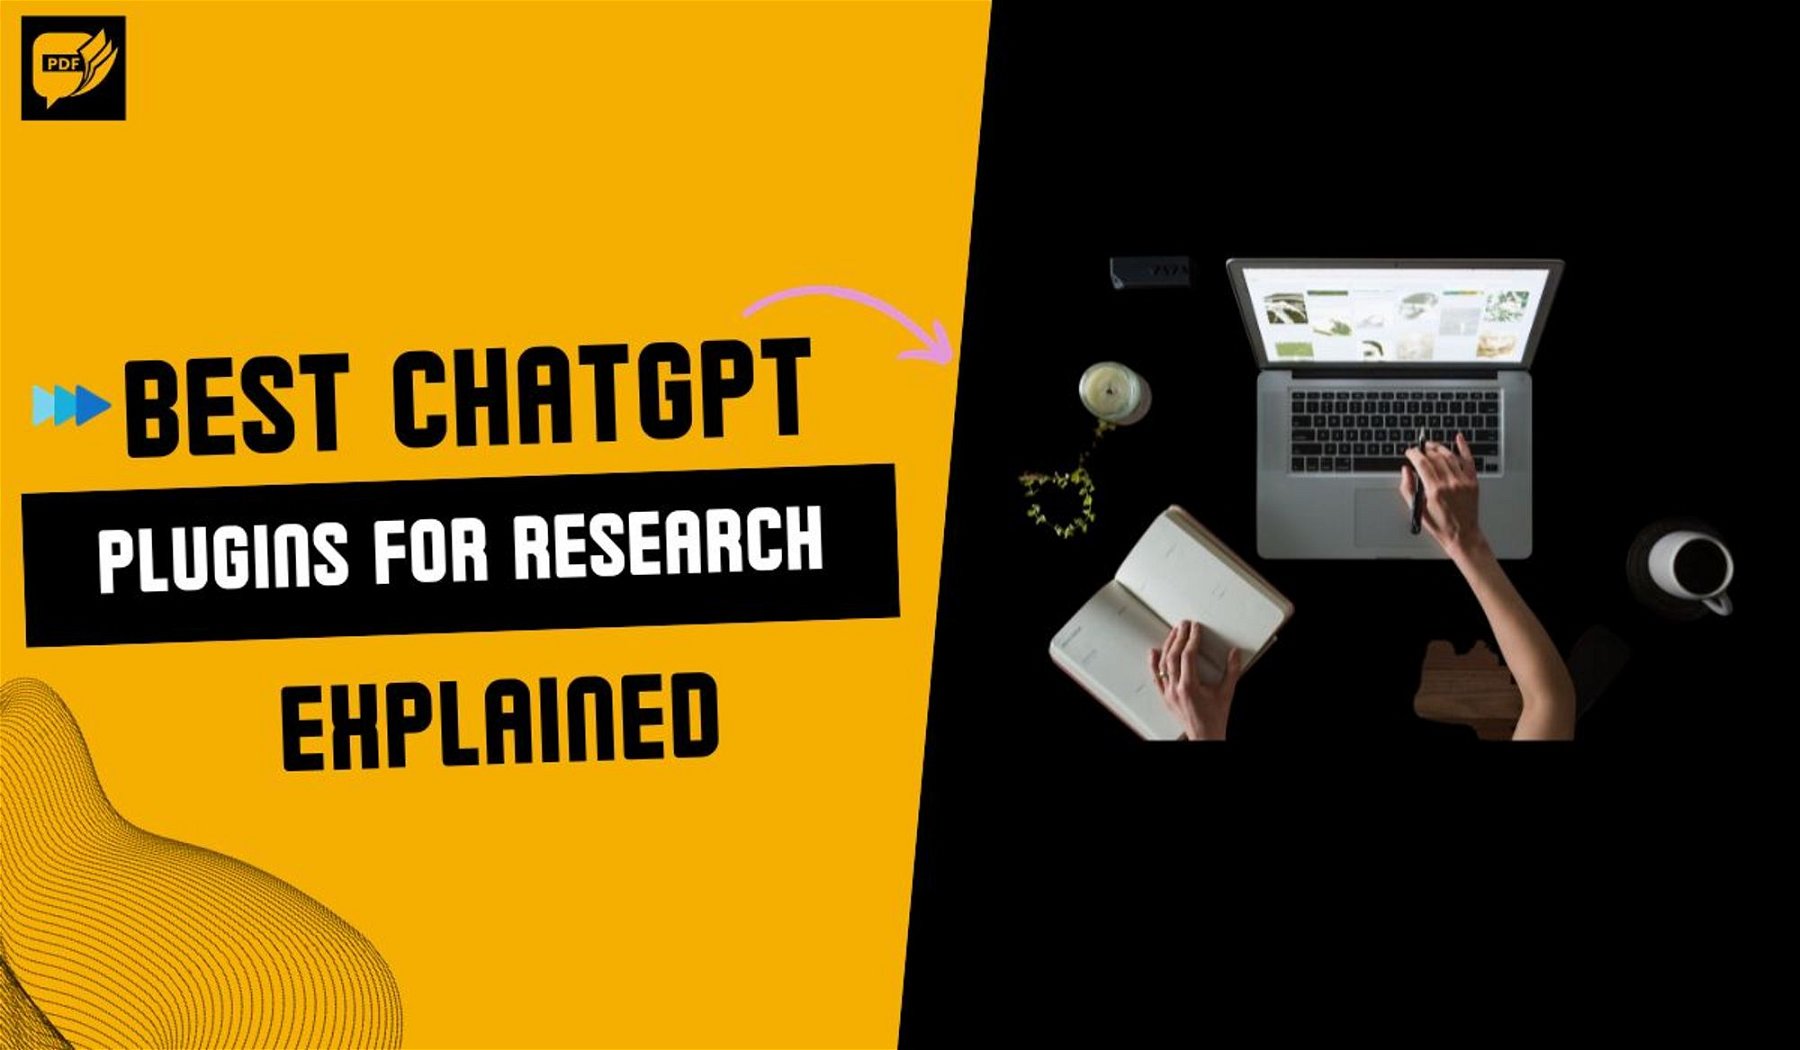 The Best ChatGPT Plugins for Research